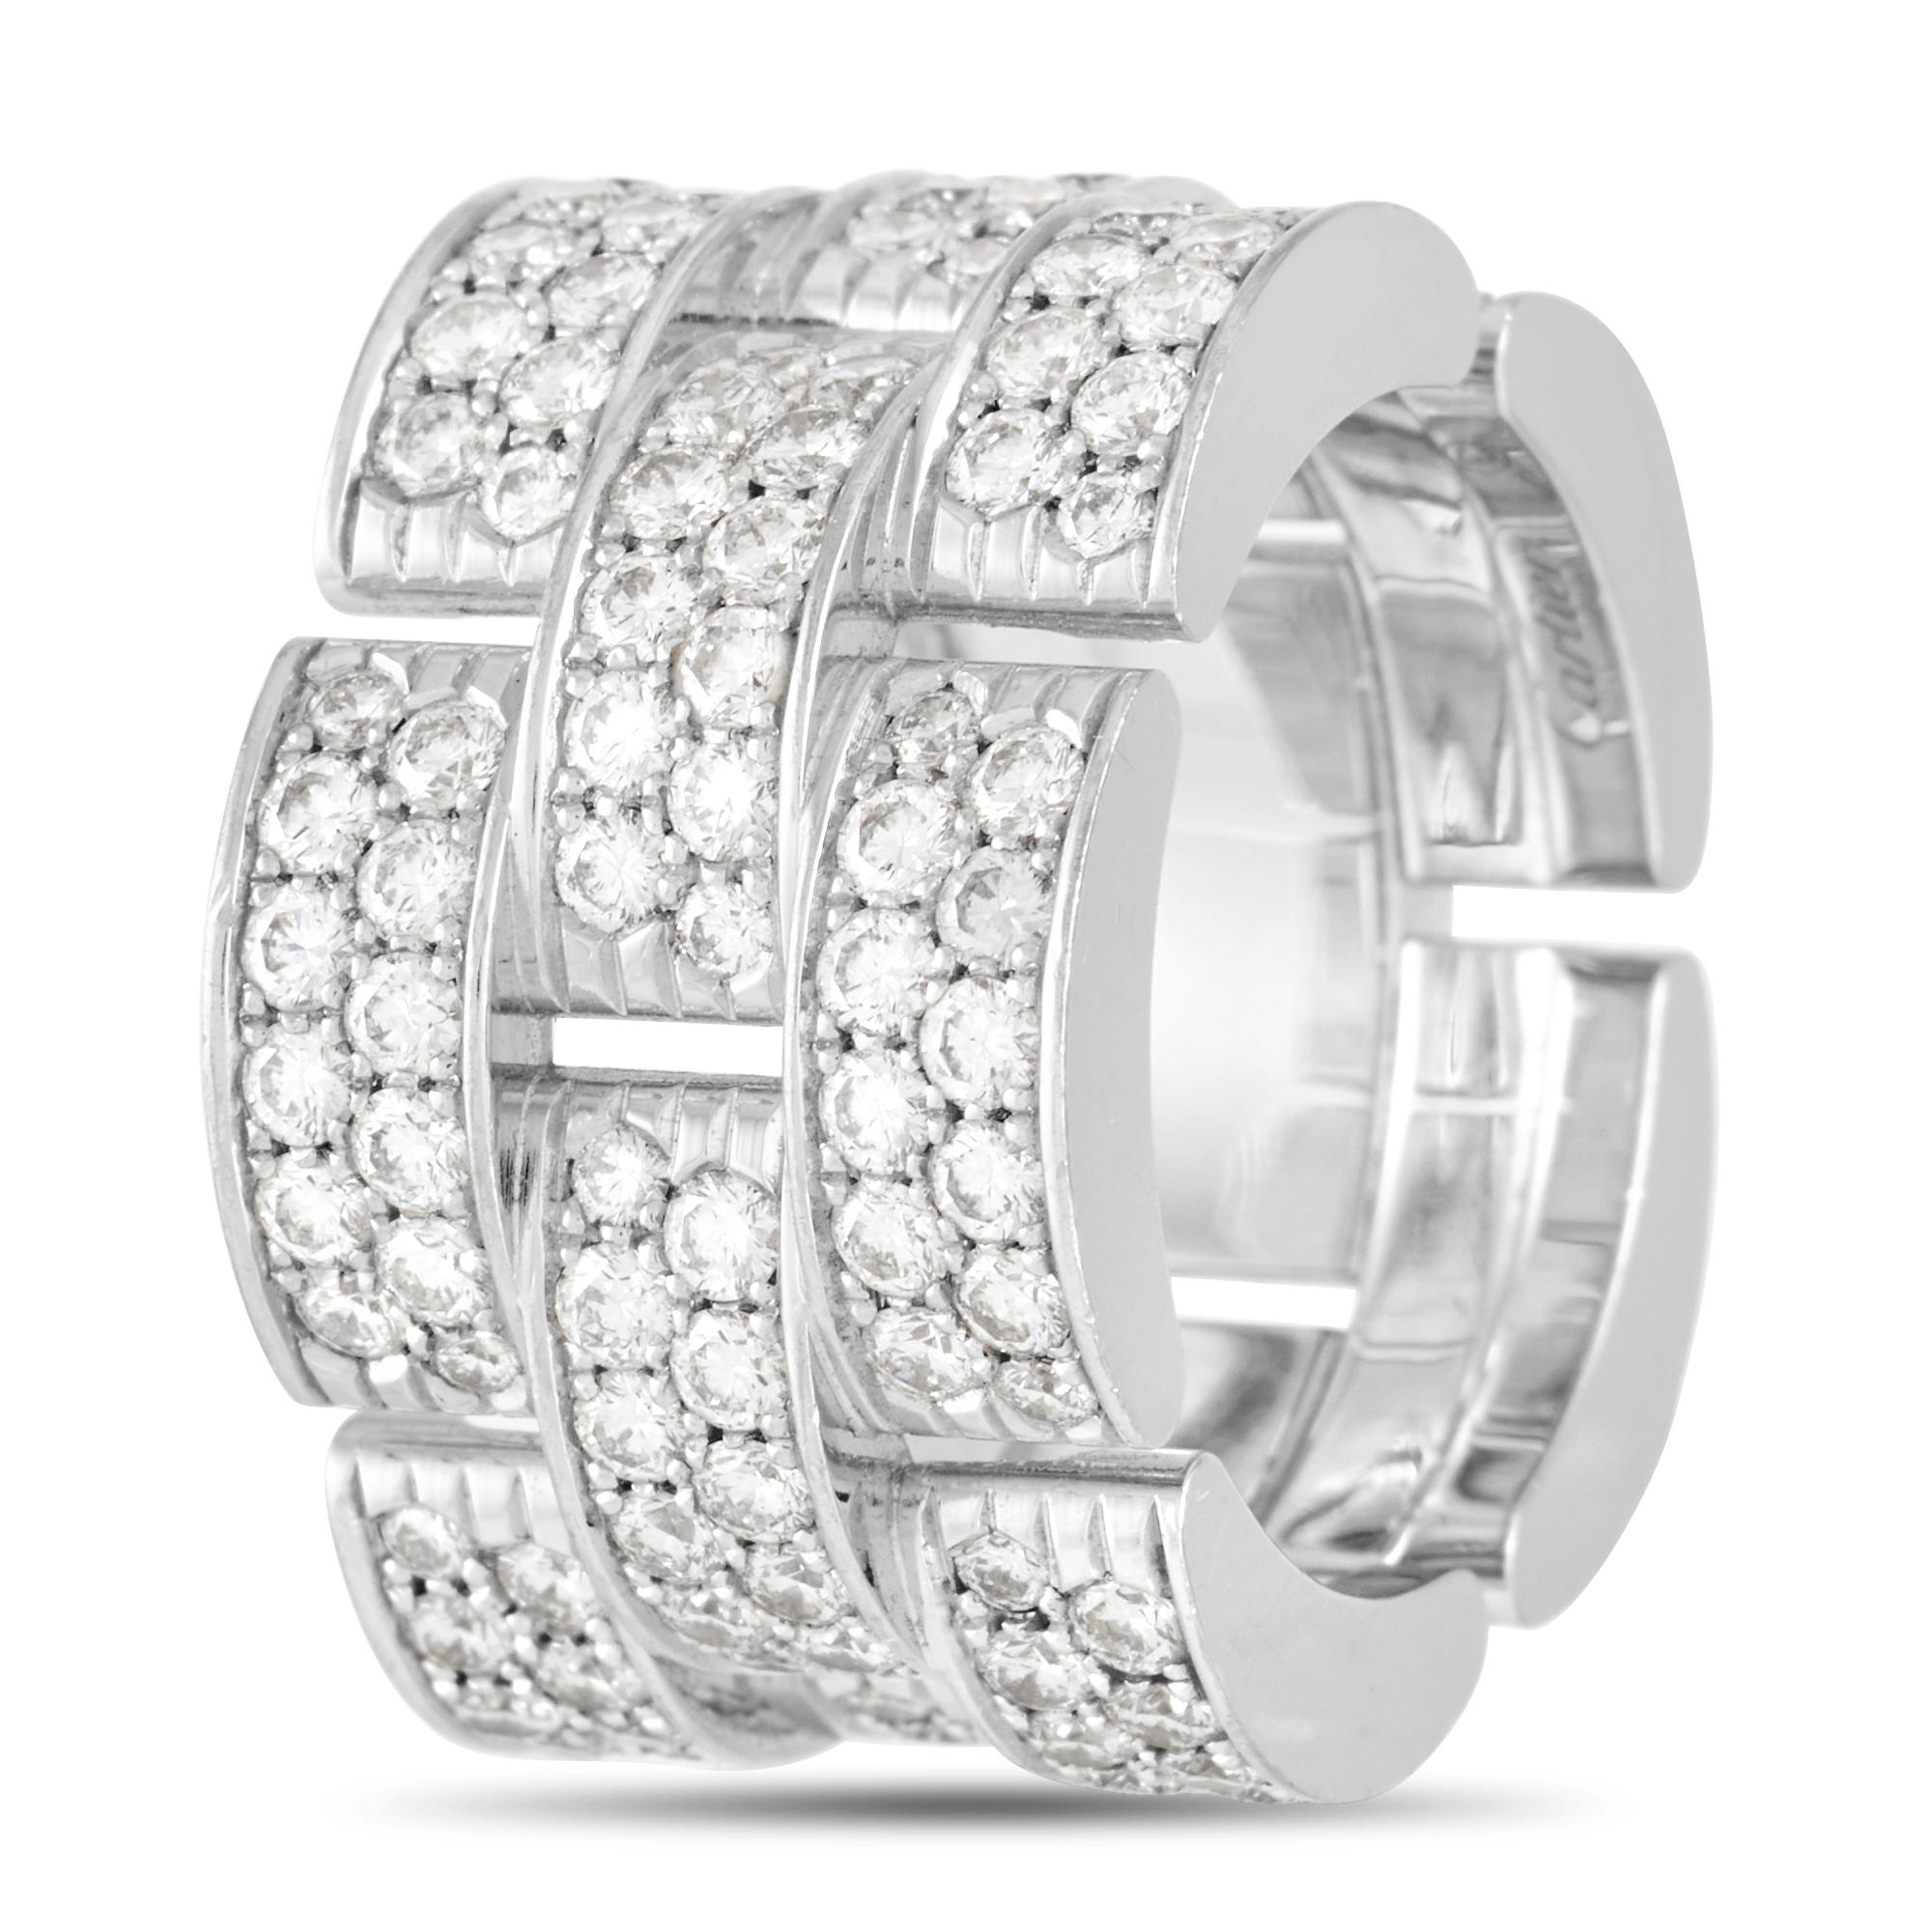 This stunning ring from the Maillon De Cartier  collection is crafted from 18K white gold, and forms three rows of alternating links set with a total of 4.00 carats of round diamonds of E color and VVS Clarity. The ring has a band thickness of 13